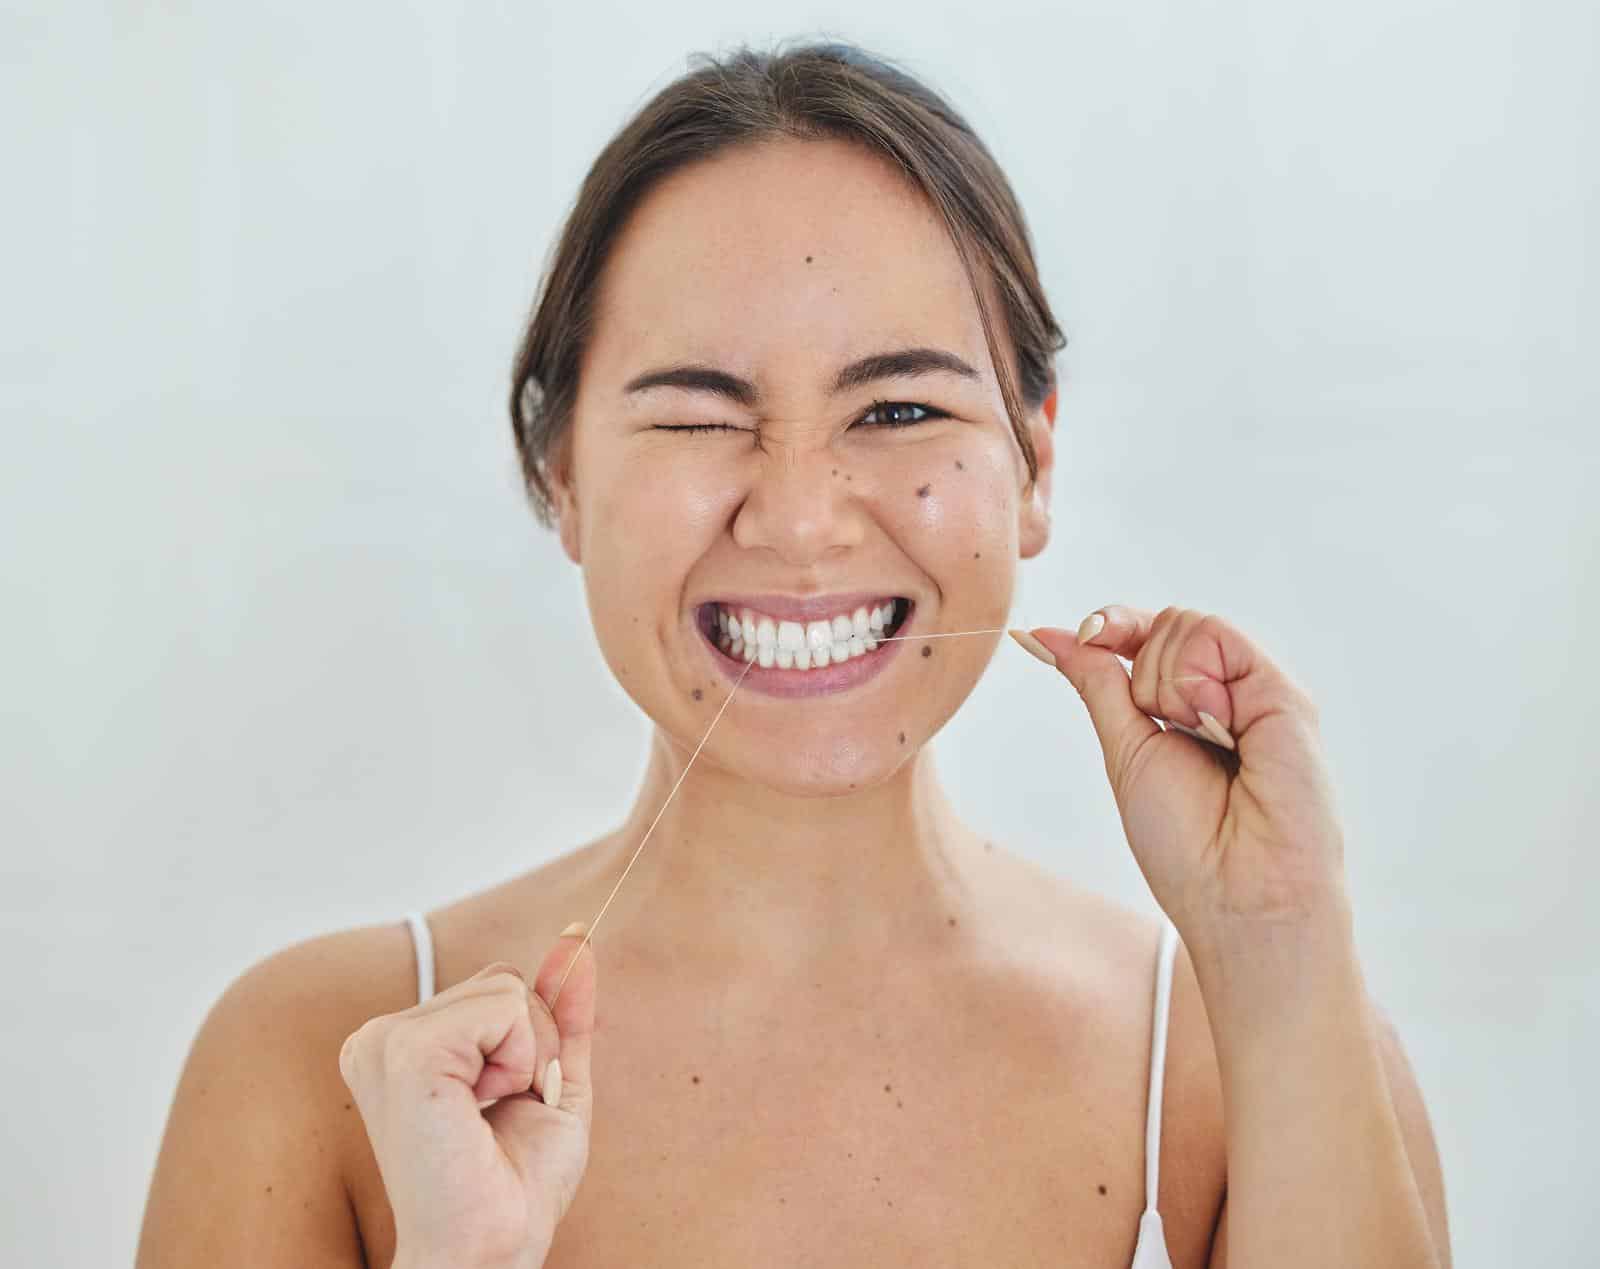 6 Essential Tips for Maintaining Good Oral Hygiene